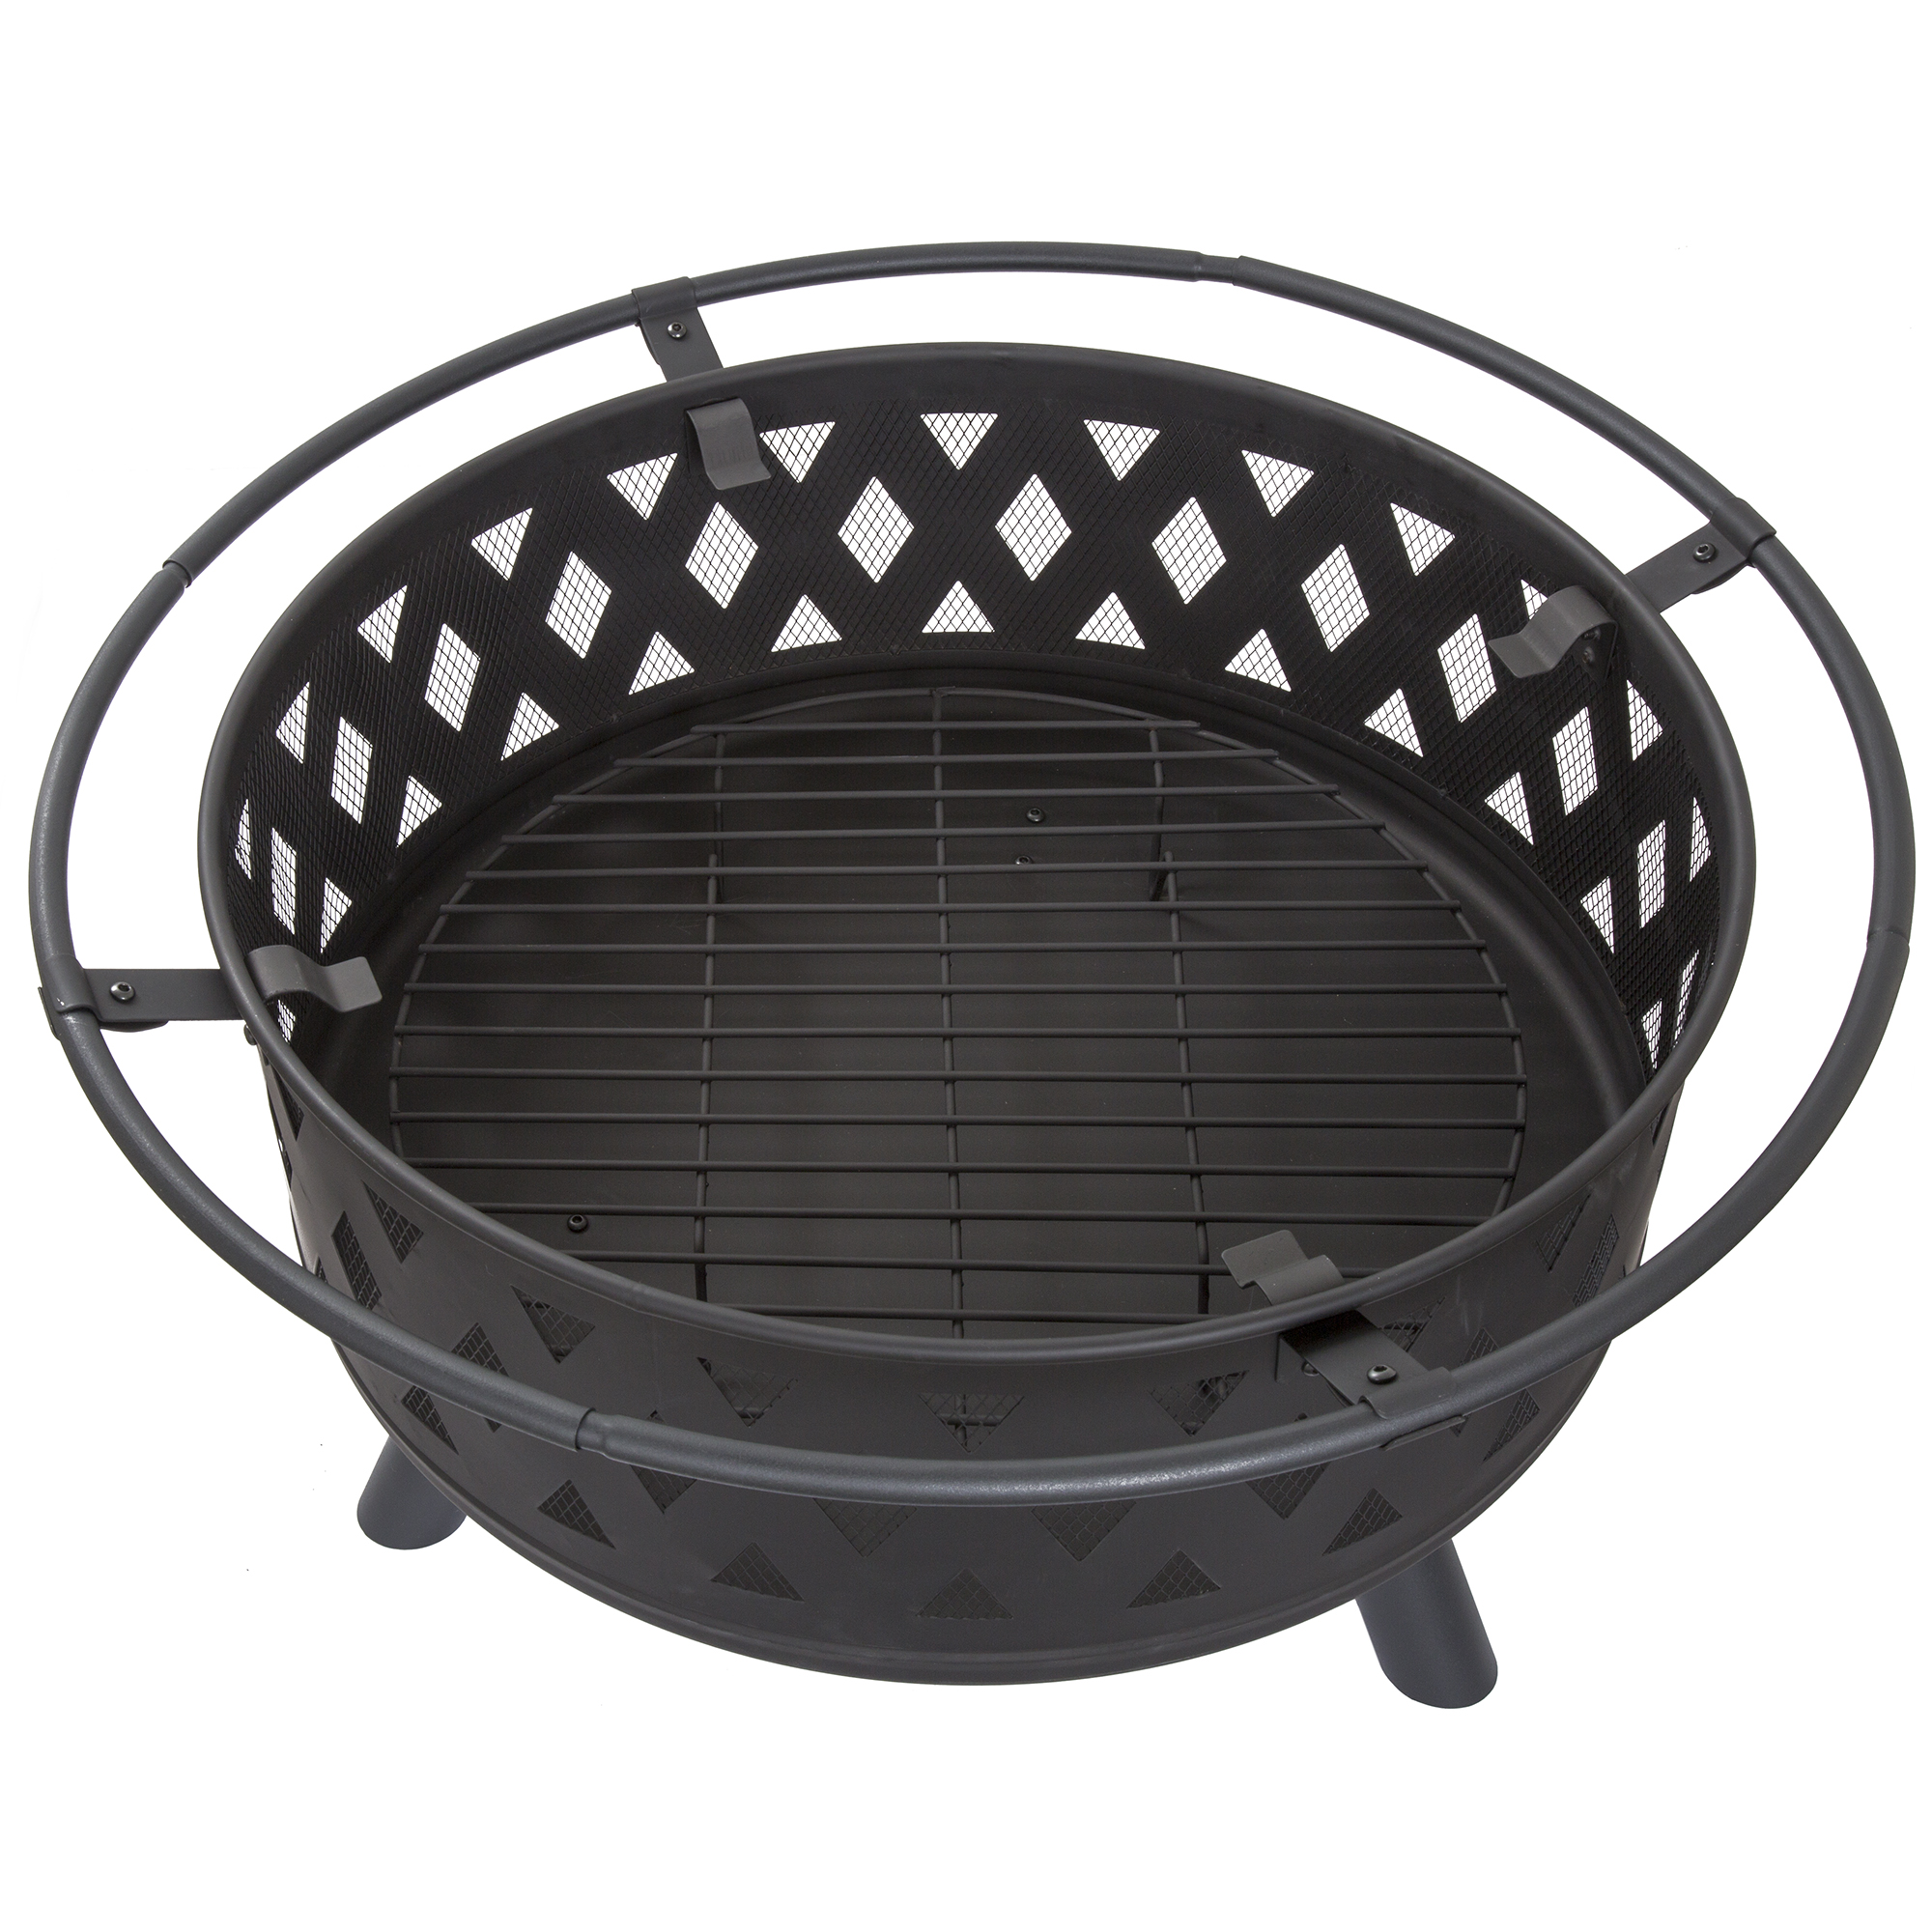 Pure Garden 32-Inch Outdoor Wood Burning Fire Pit with PVC Cover (Black) - image 3 of 10